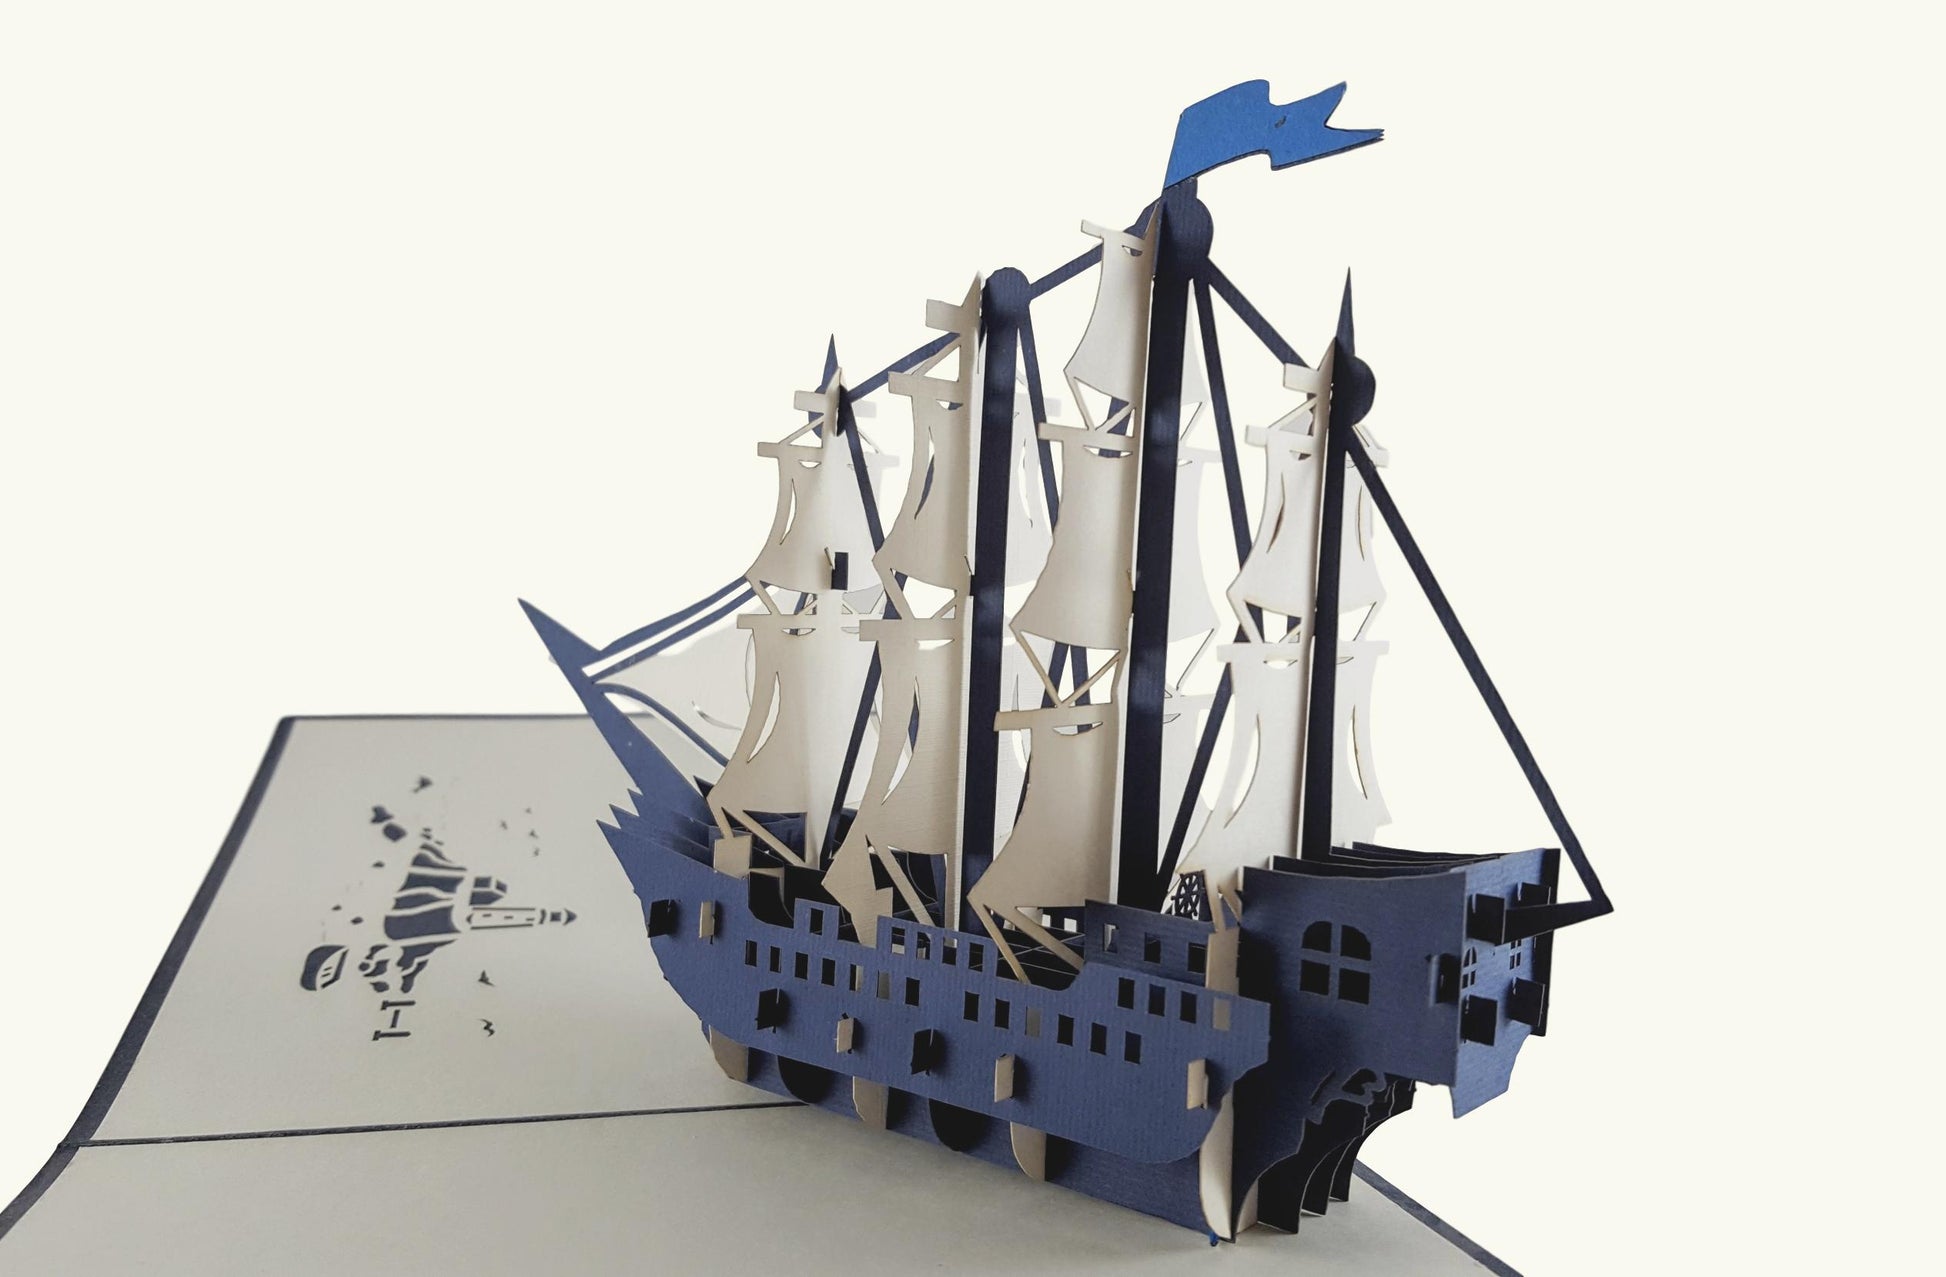 Clipper Ship 3D Pop Up Greeting Card - Admin Assistant Day - Graduation - Just Because - Retirement - iGifts And Cards